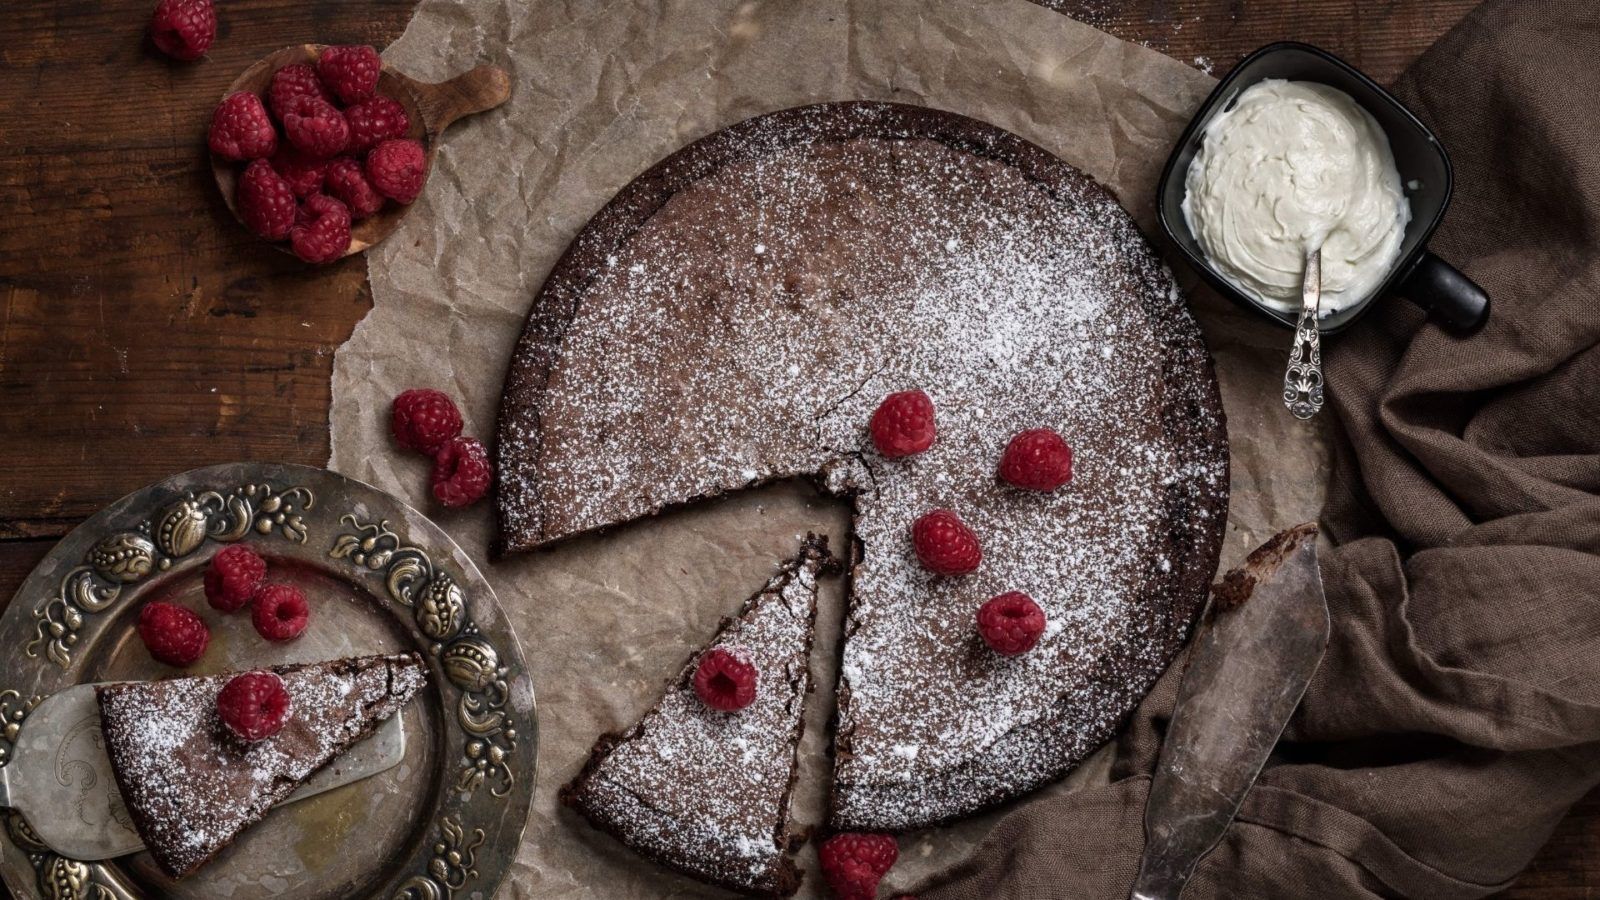 Take your tastebuds on an adventure around the world with these chocolate dessert recipes